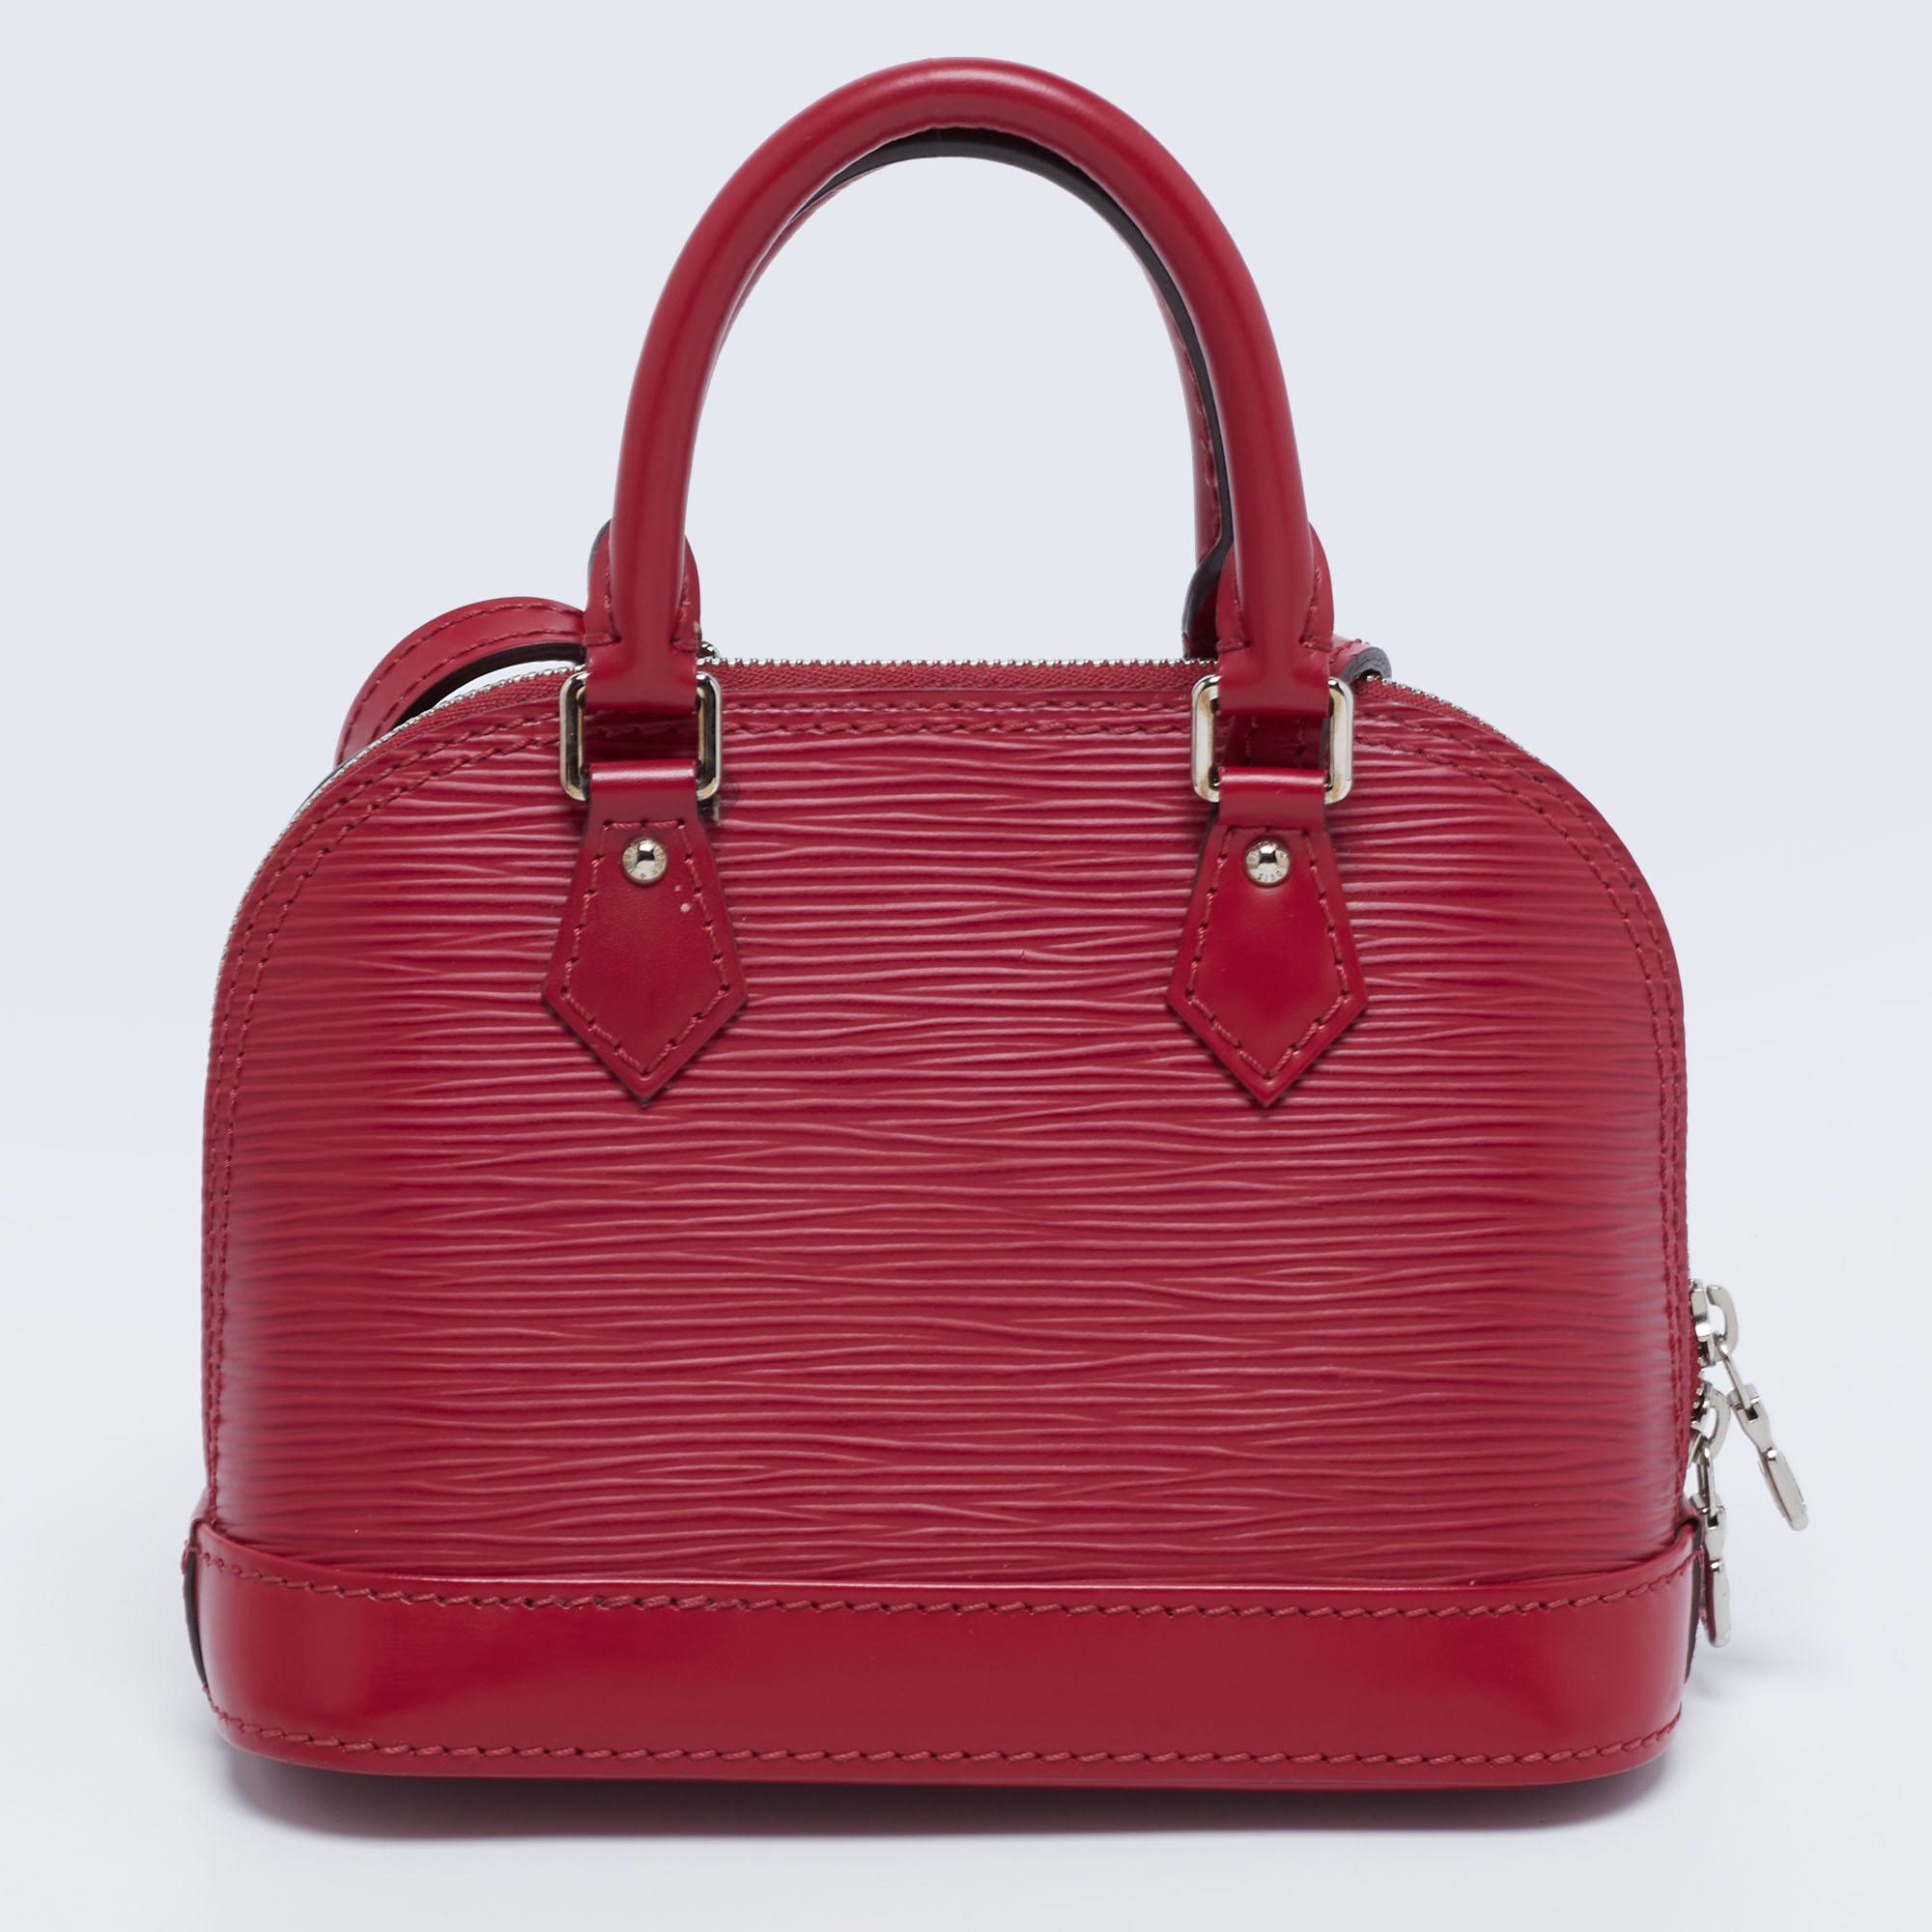 The iconic Louis Vuitton Alma is presented in fuchsia Epi leather for this piece. It has double zippers, an Alcantara interior, top handles, and an optional strap. Add a piece of handbag history to your collection today!

